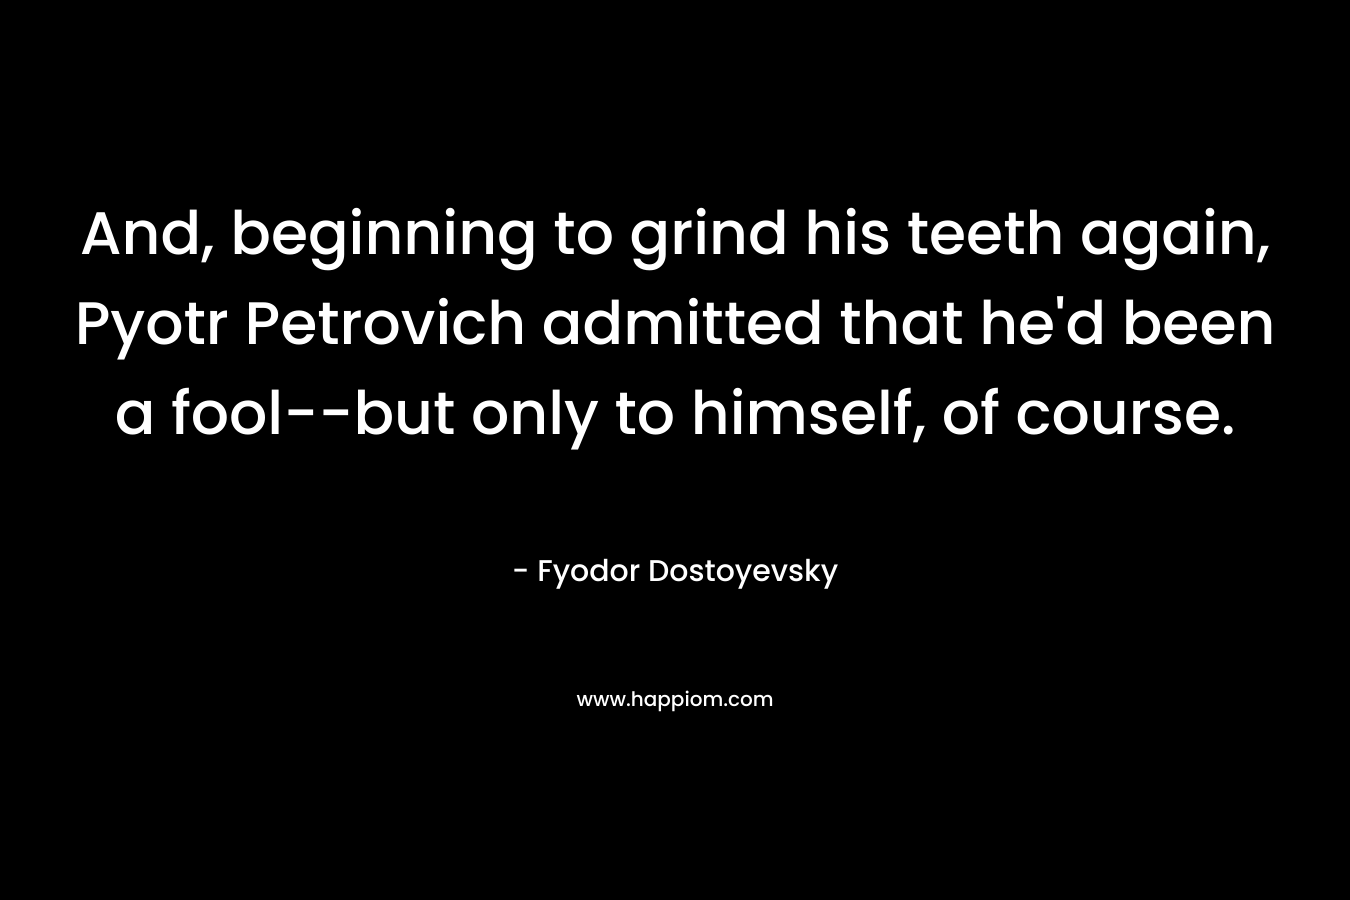 And, beginning to grind his teeth again, Pyotr Petrovich admitted that he'd been a fool--but only to himself, of course.